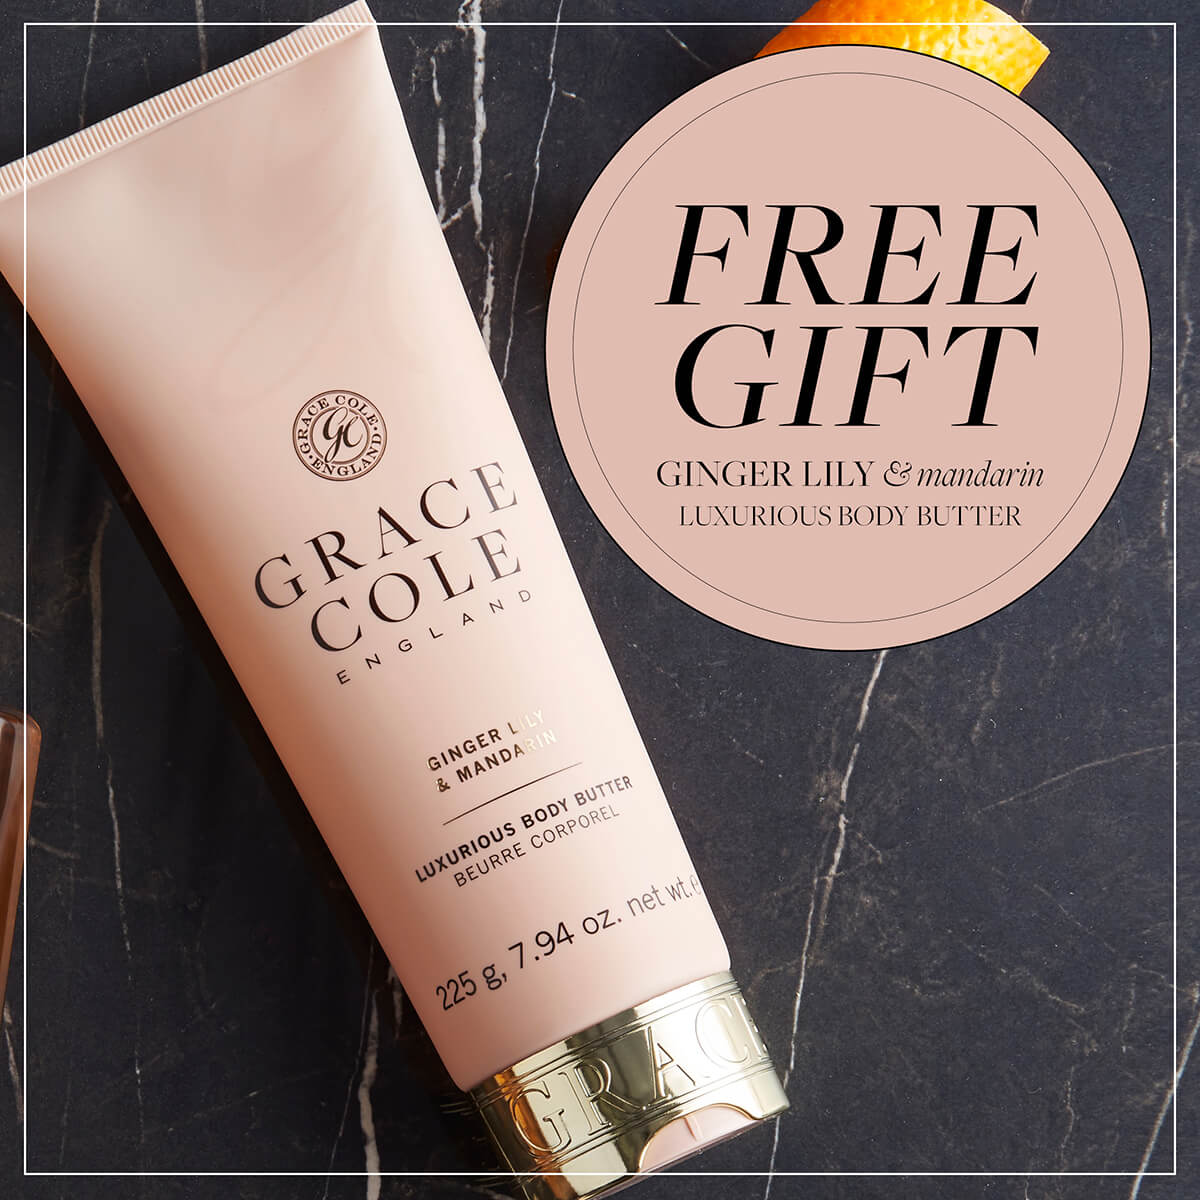 Free gift. Ginger Lily & Mandarin luxurious body butter.